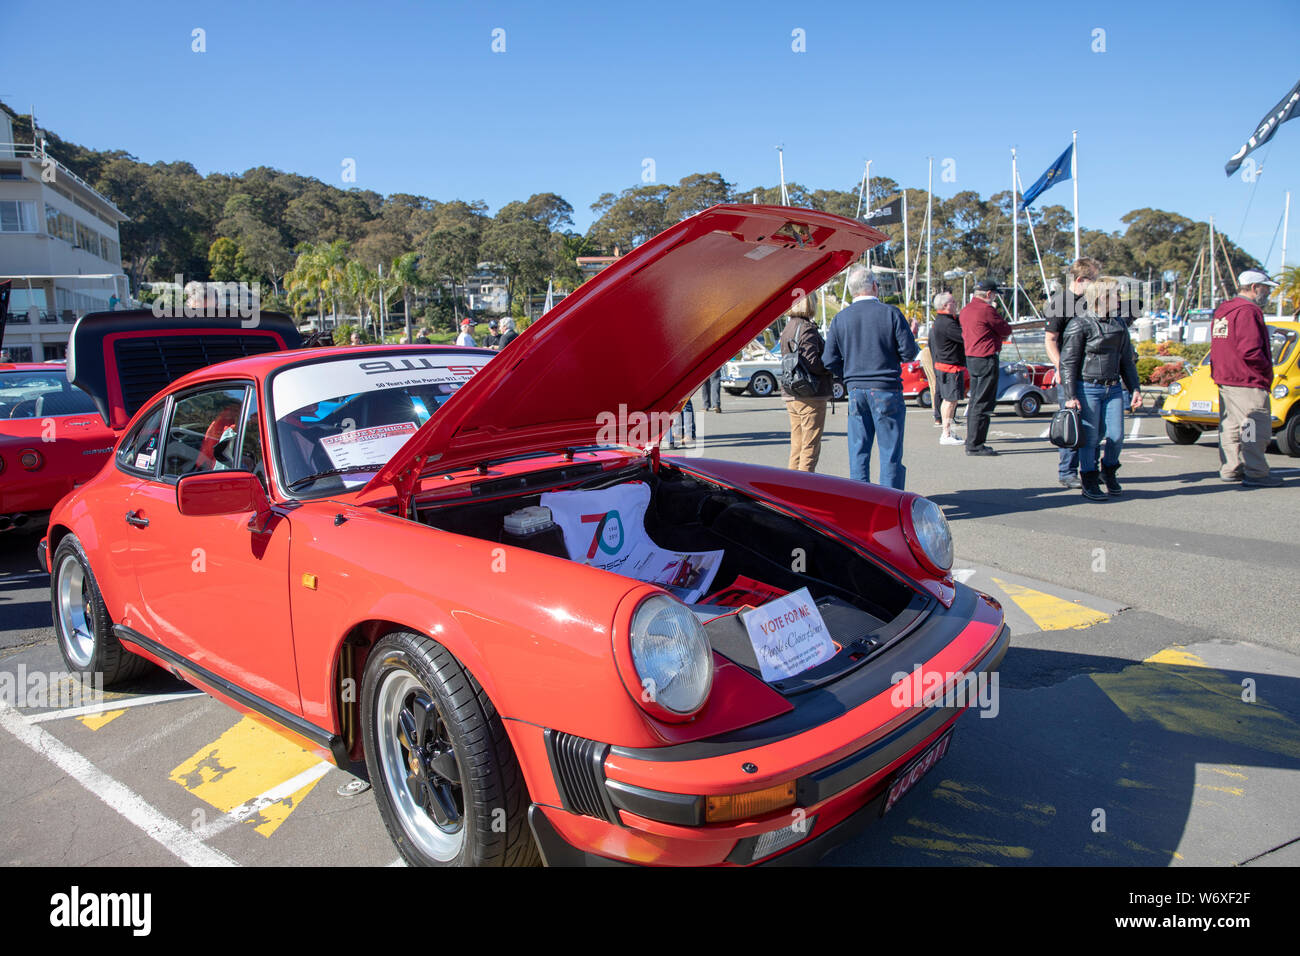 Porsche Carrera 911 with 3.2 litre engine on display at Sydney classic car show,Australia Stock Photo